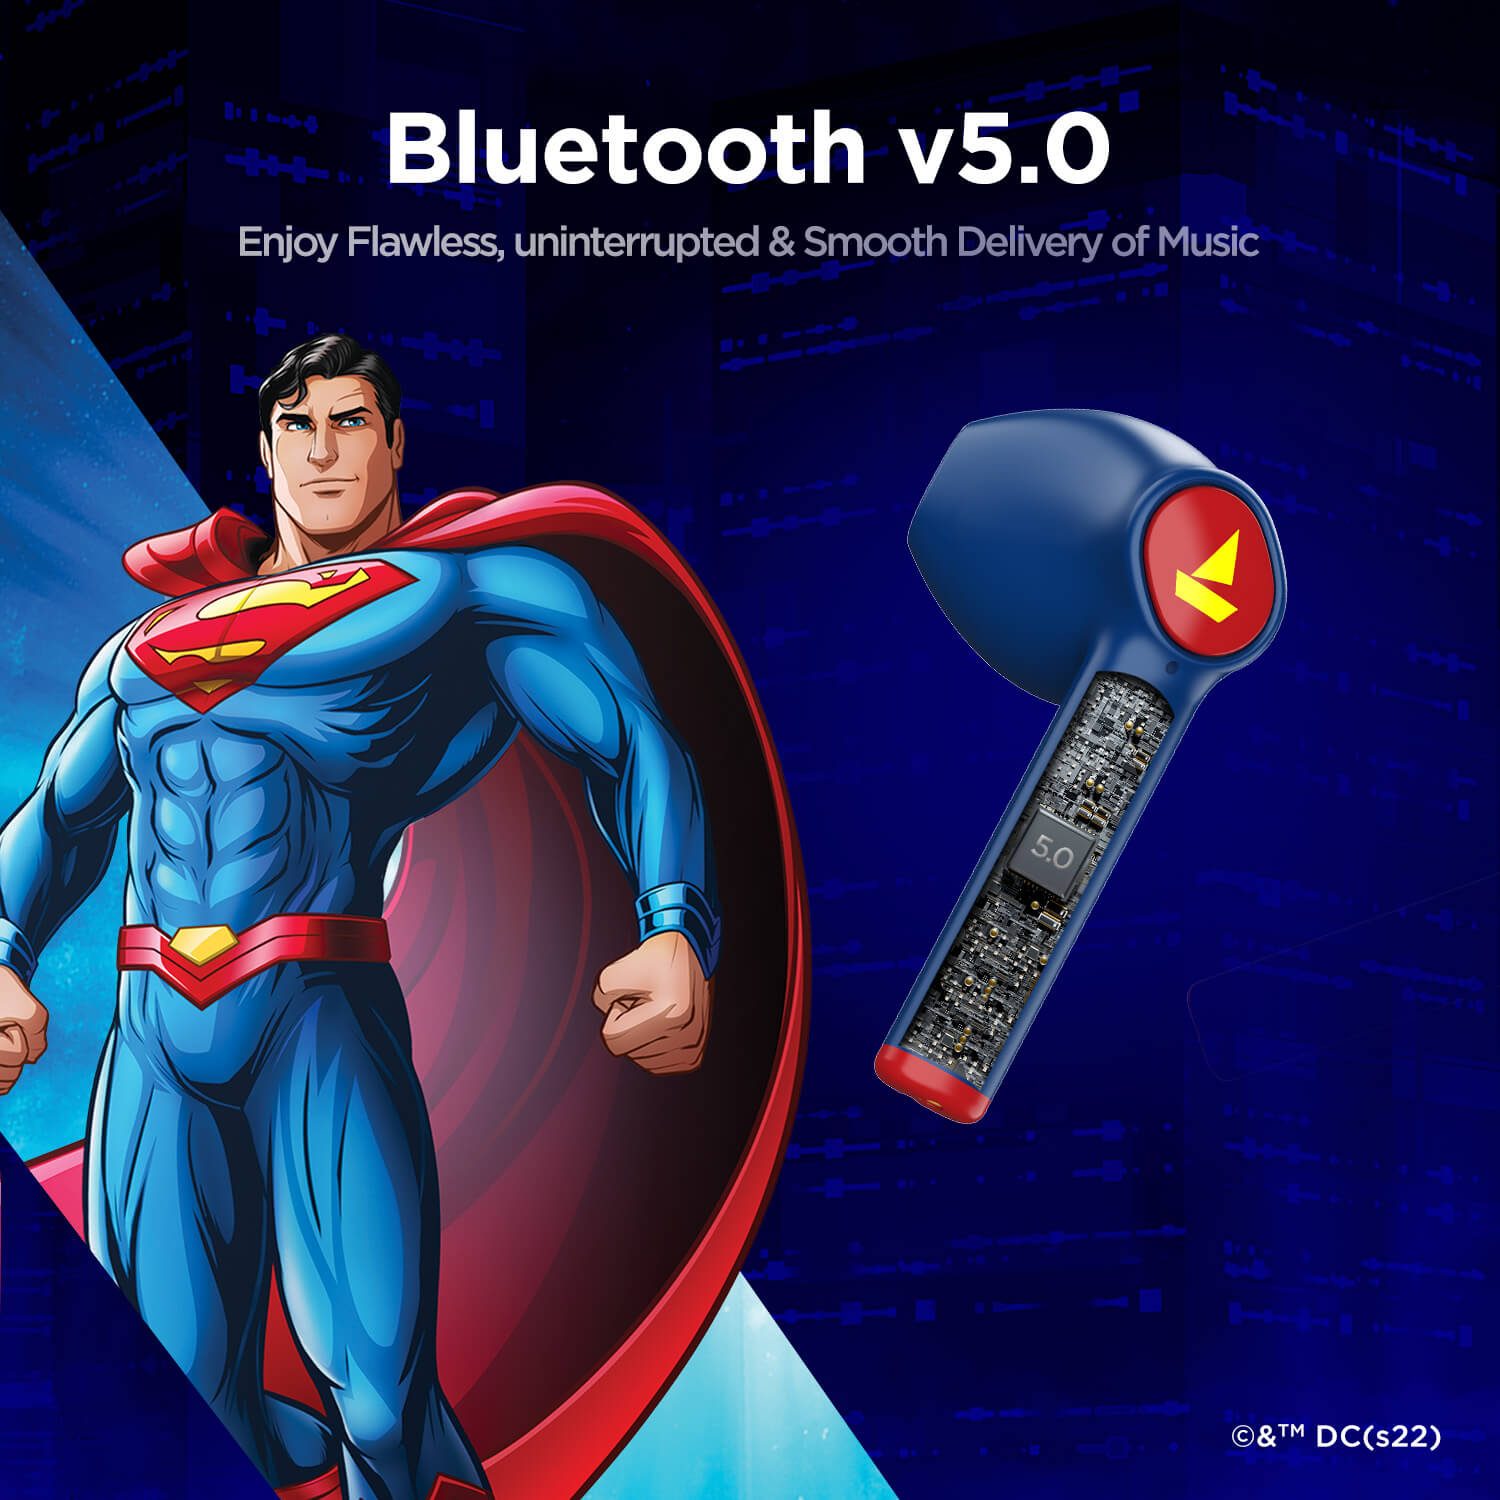 boAt Airdopes 131 | Wireless Earbuds Superman DC Edition Earbuds with 13 mm Drivers, Upto 12 hours Nonstop Music, 650mAh Pocket Friendly Charging Case